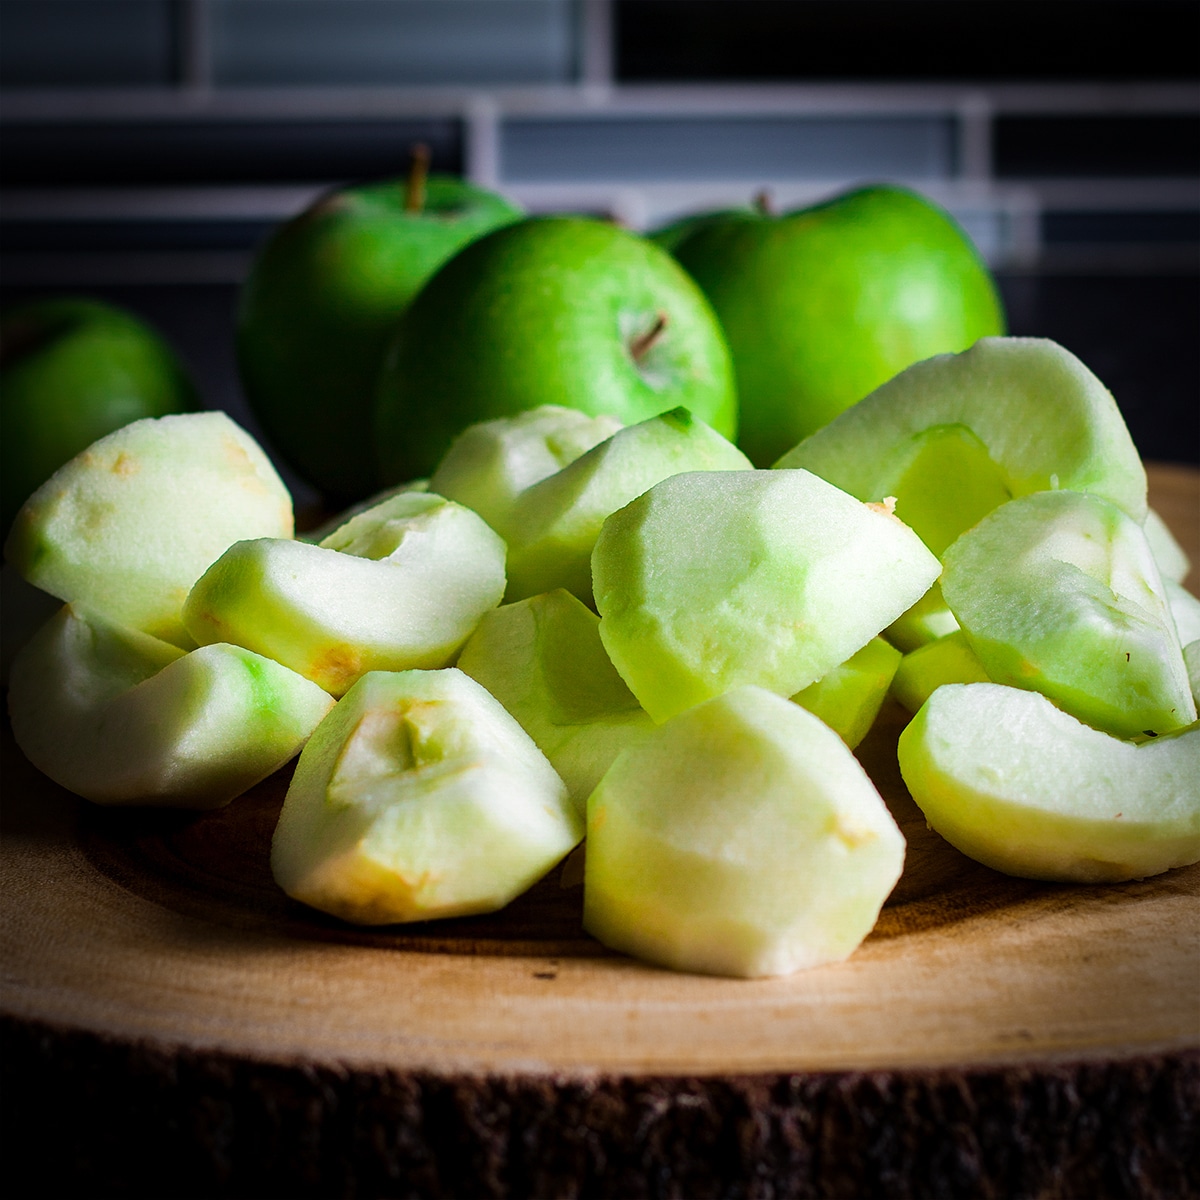 A pile of partially peeled and sliced green apples on a wood cutting board.